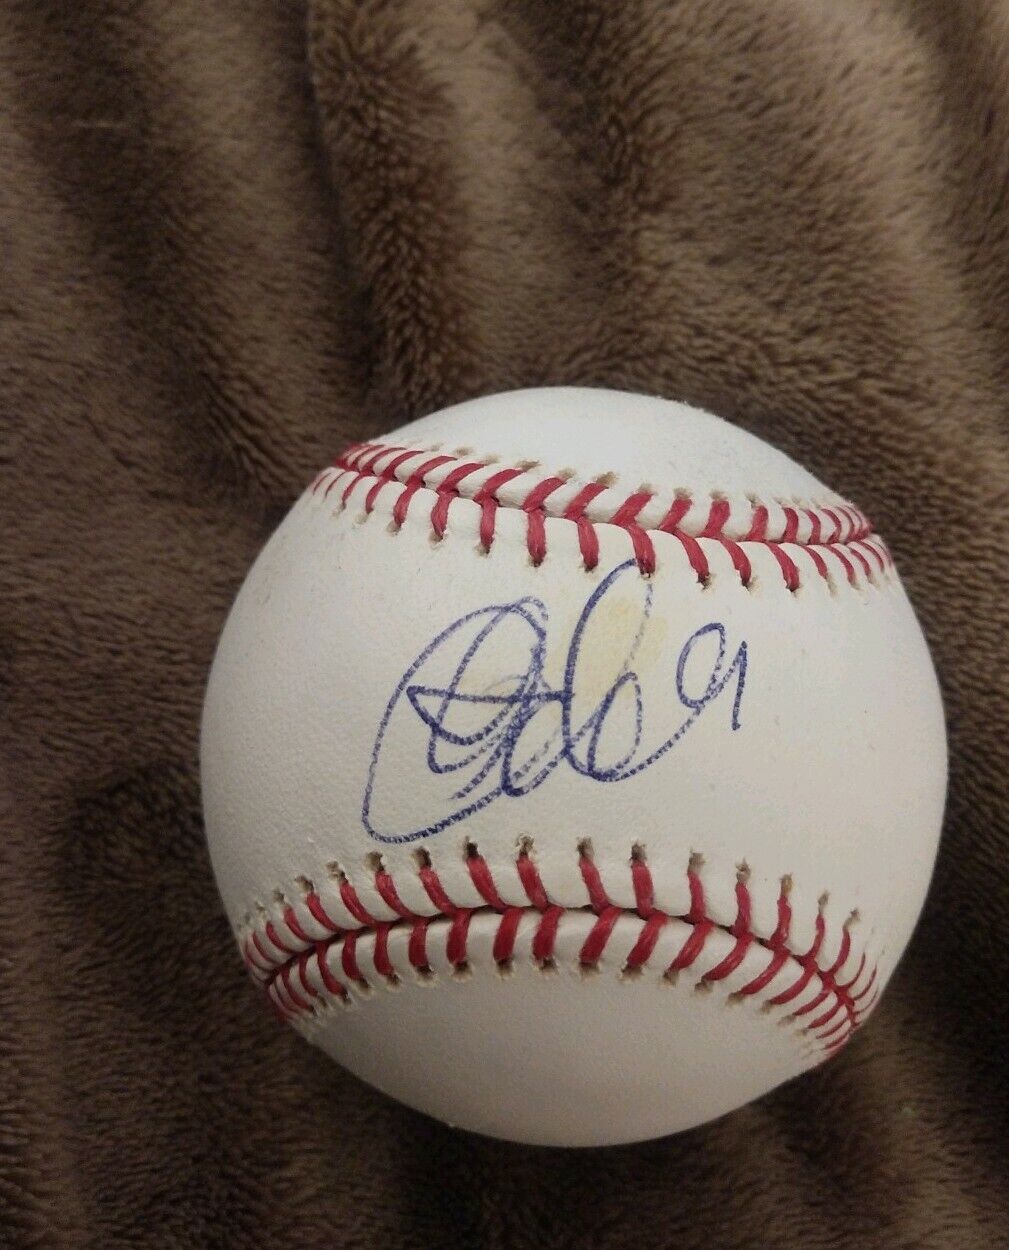 CLIFF LEE SIGNED OFFICIAL MLB BASEBALL PHILLIES CY YOUNG WCOA+PROOF RARE WOW